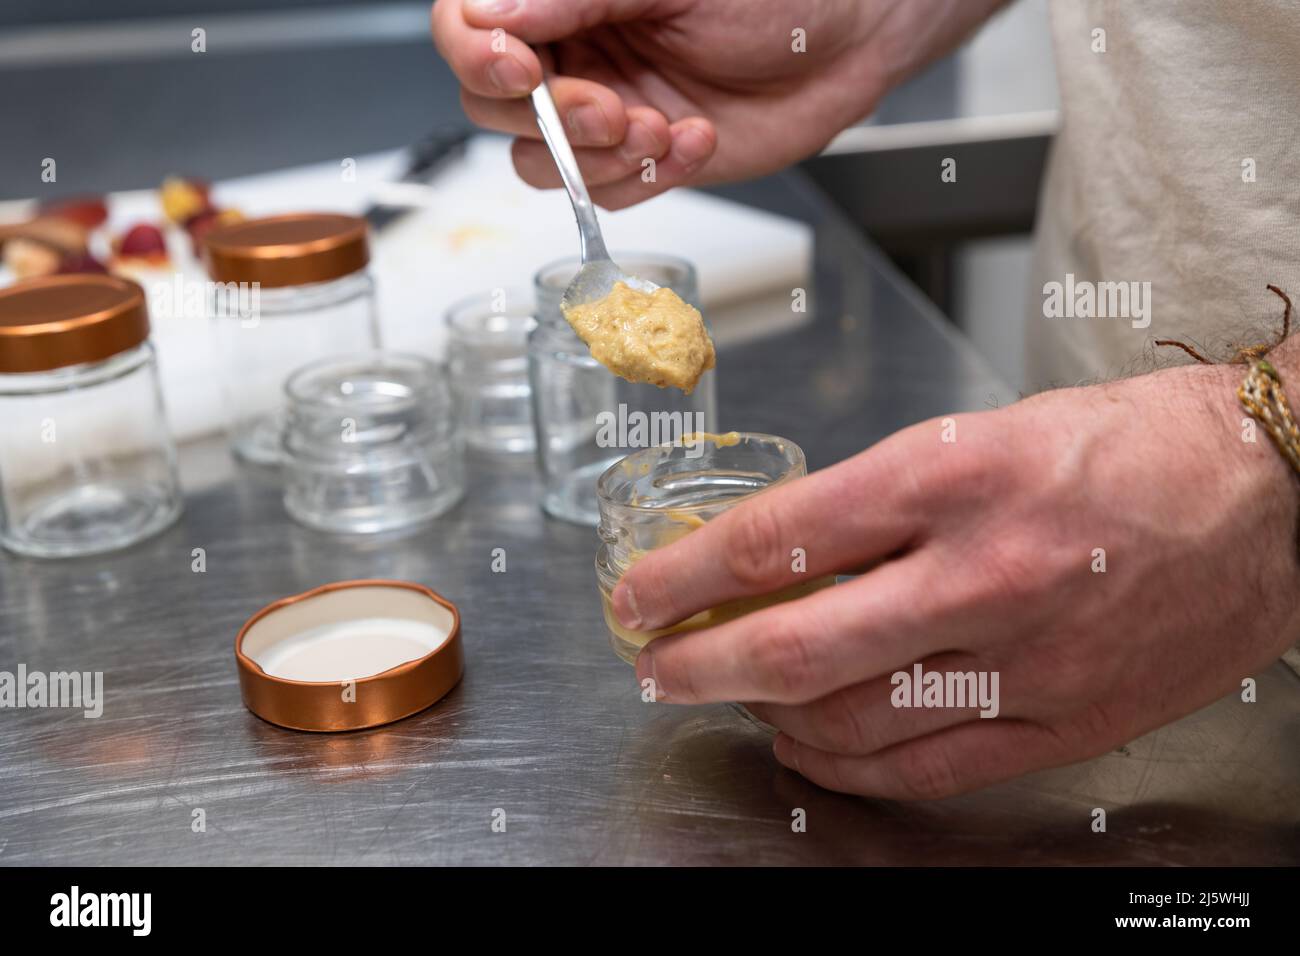 hands of a man is manufacturing food in a kitchen Stock Photo